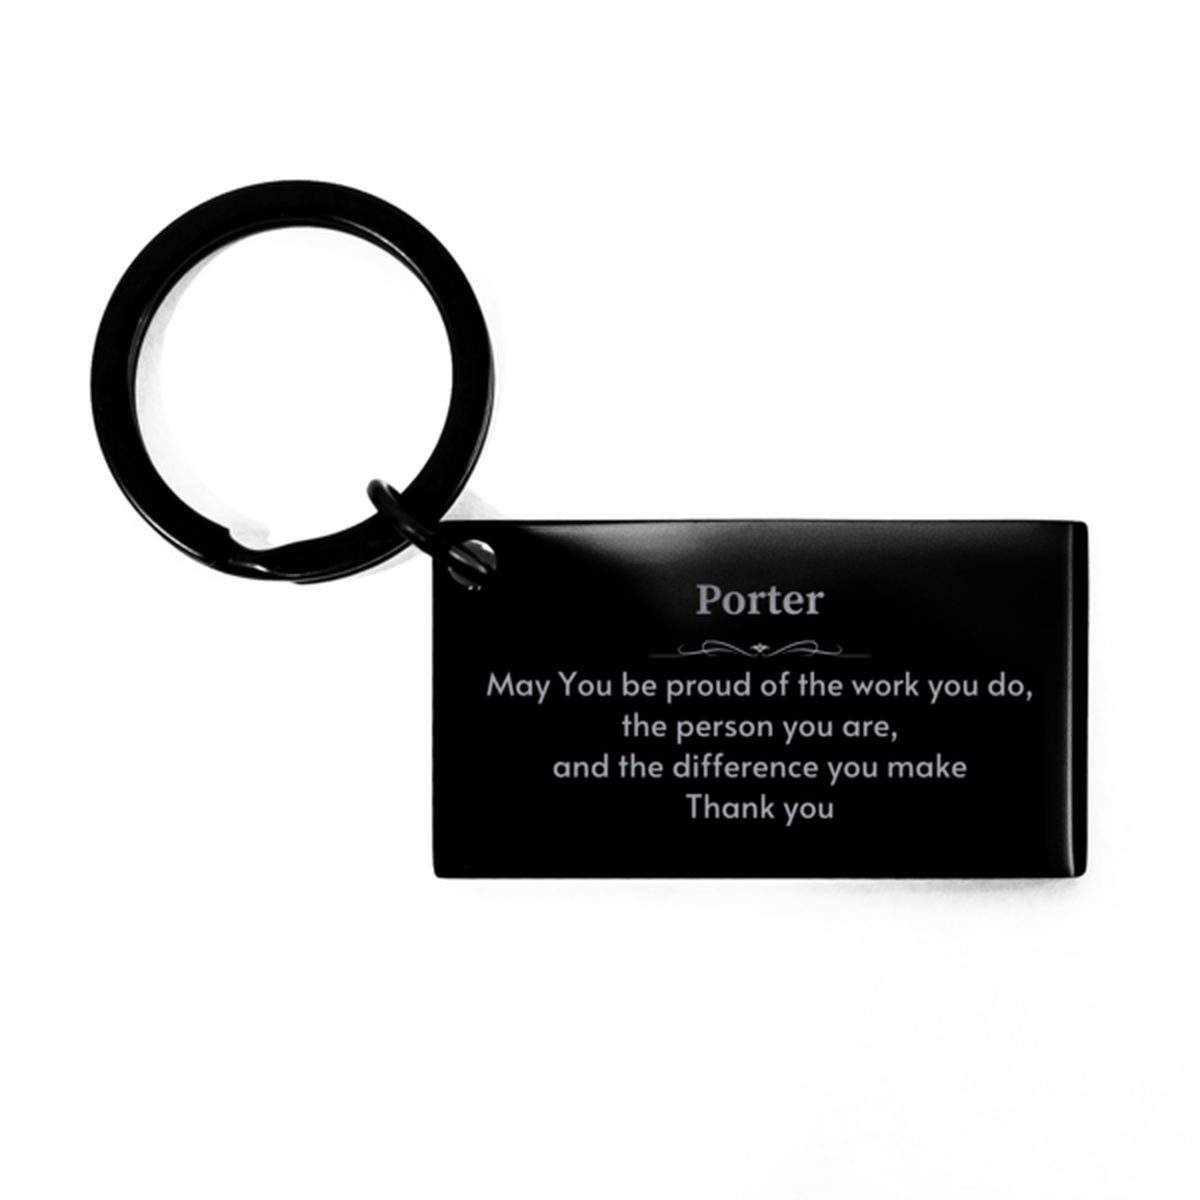 Heartwarming Keychain Retirement Coworkers Gifts for Porter, Securities Trader May You be proud of the work you do, the person you are Gifts for Boss Men Women Friends